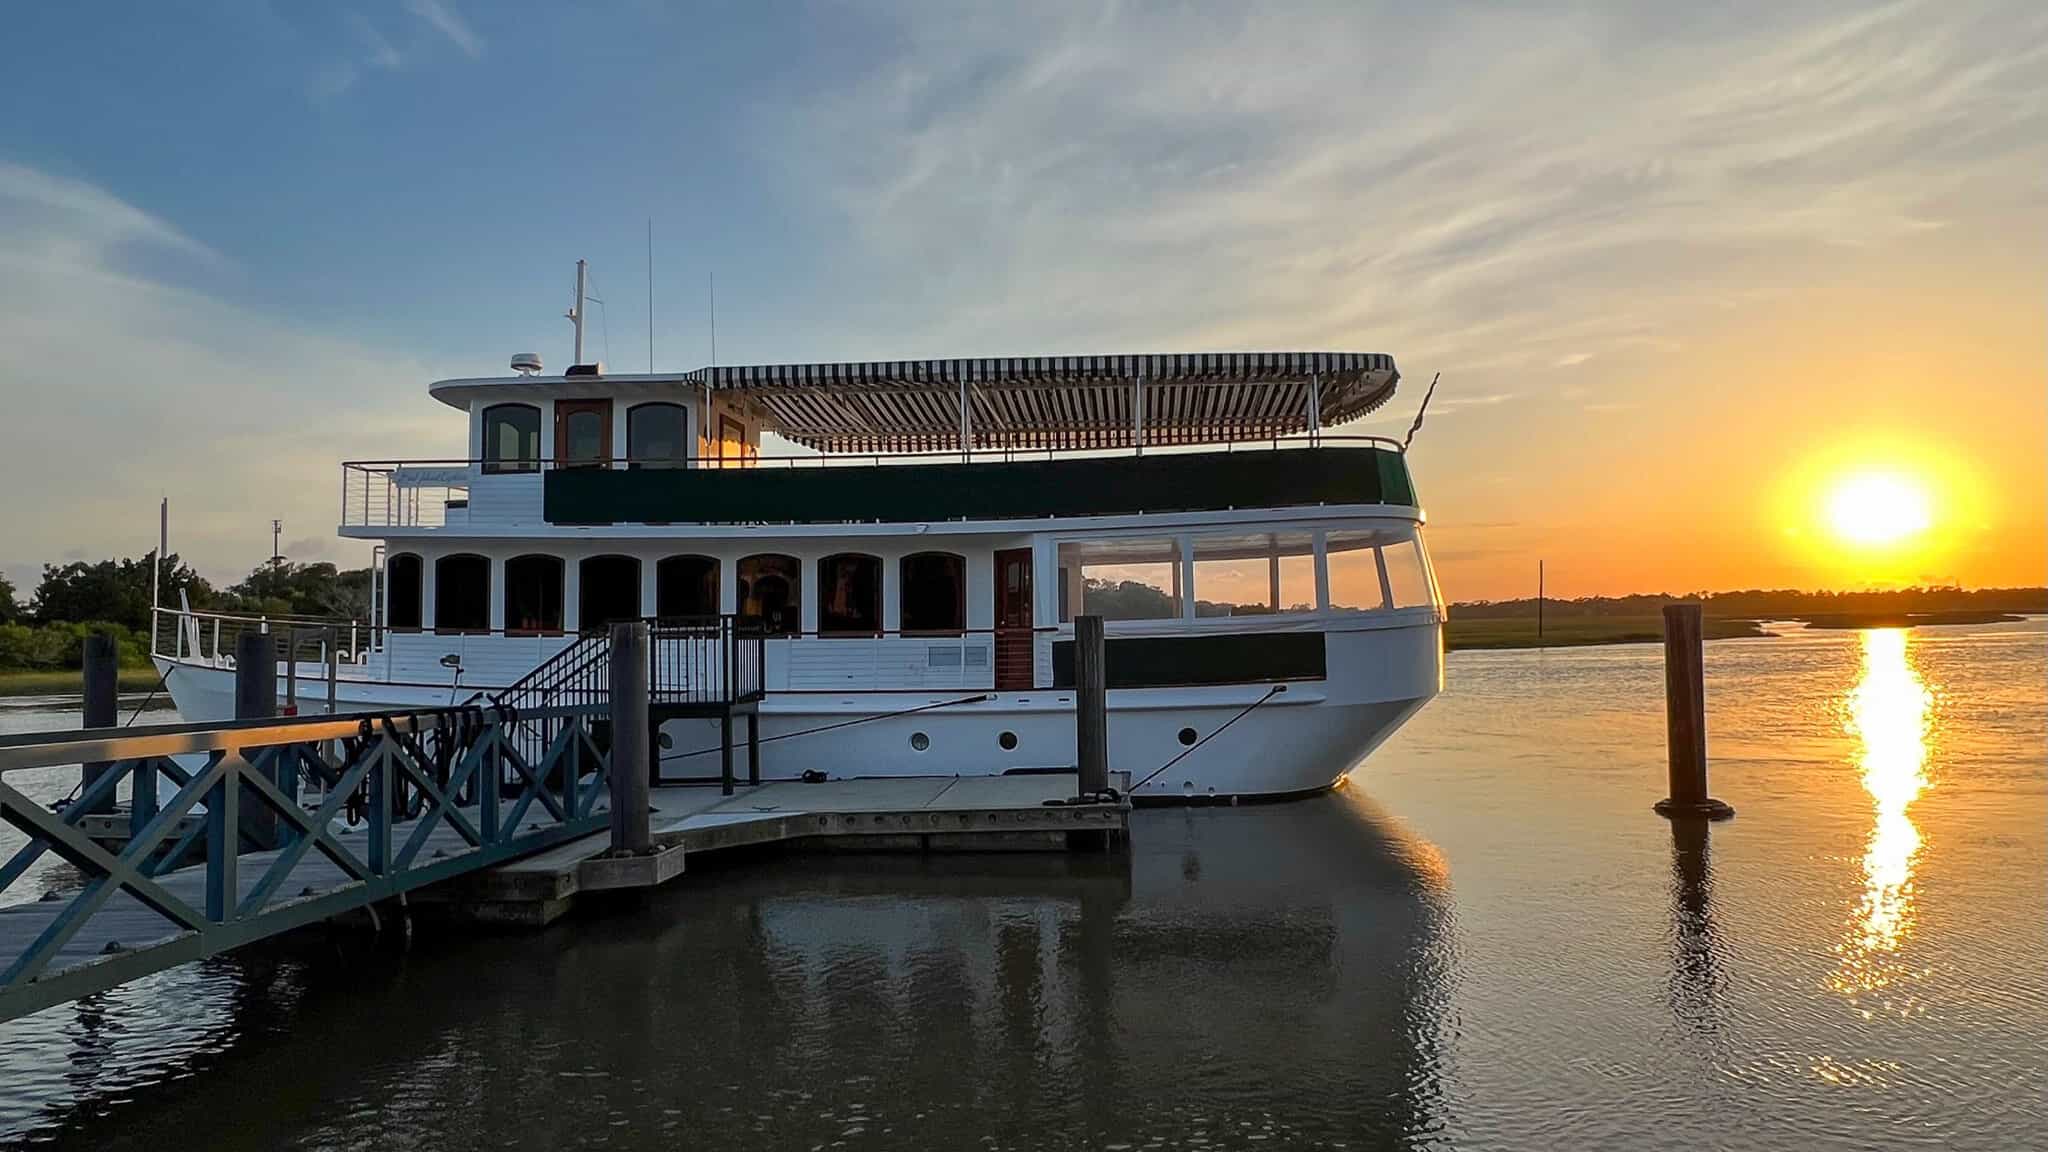 river boat at sea island - luxury spring break destinations for families